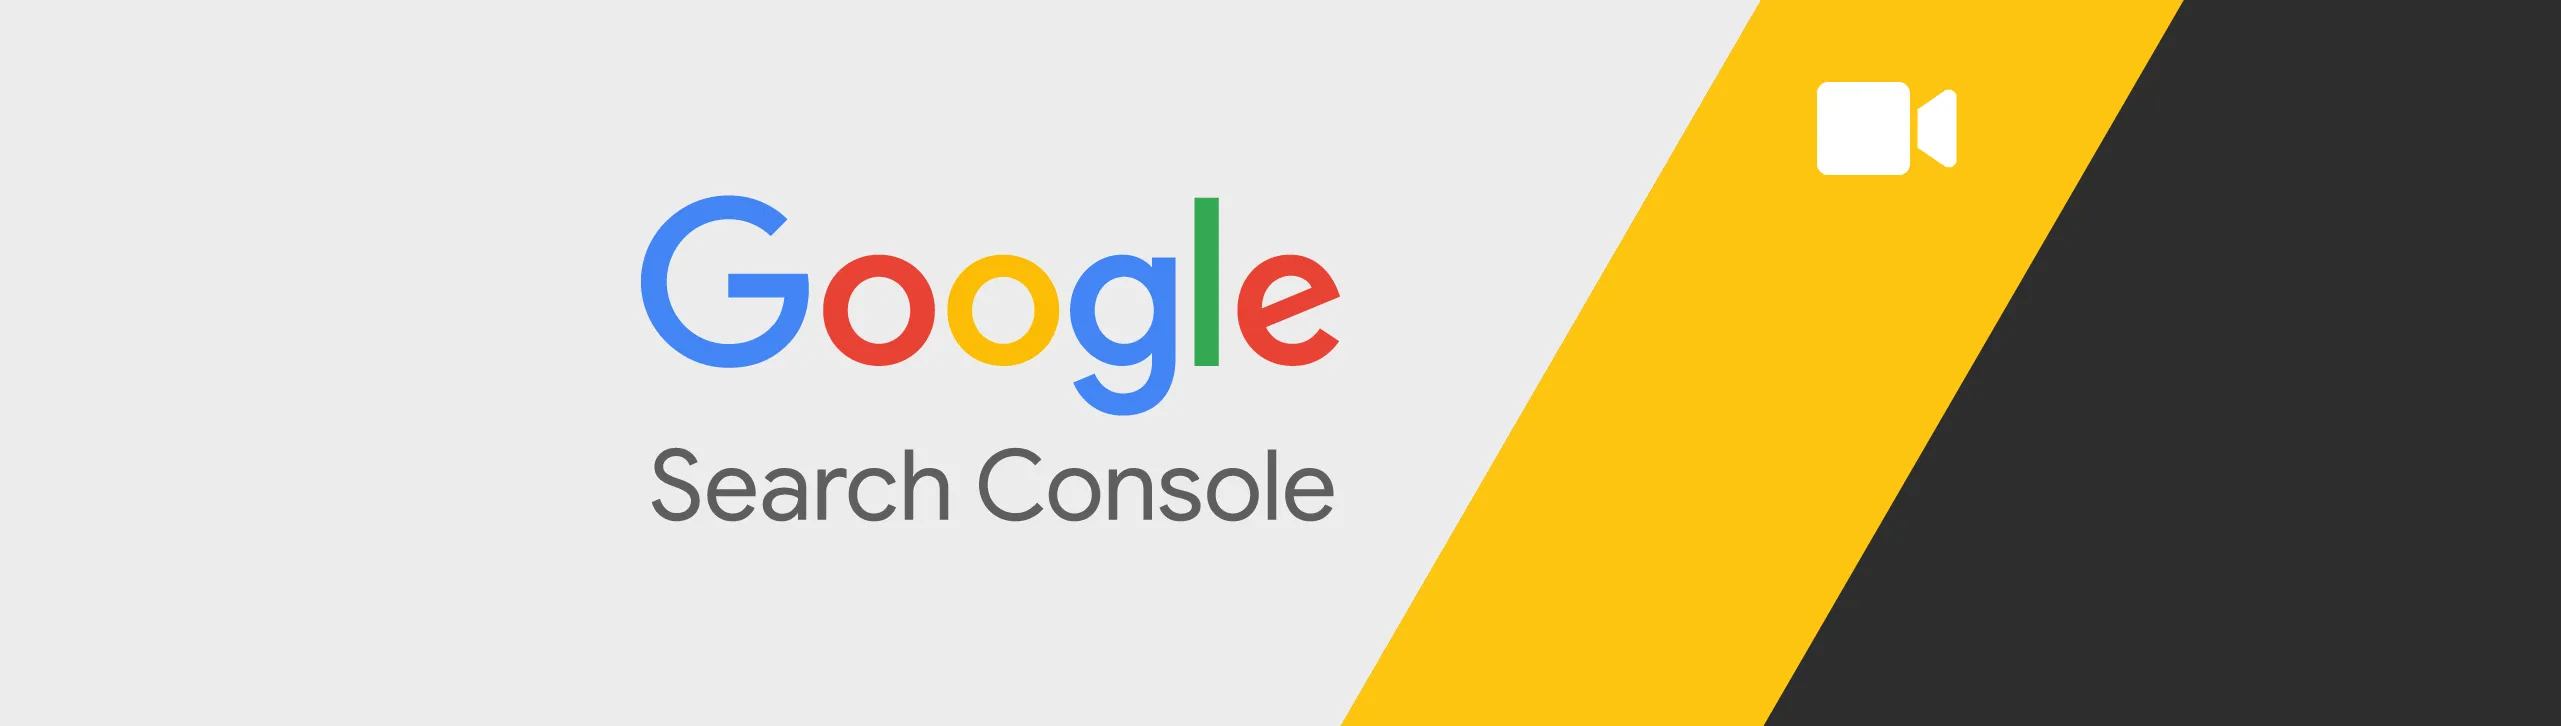 How to Grant Access to Google Search Console (WITH VIDEO)